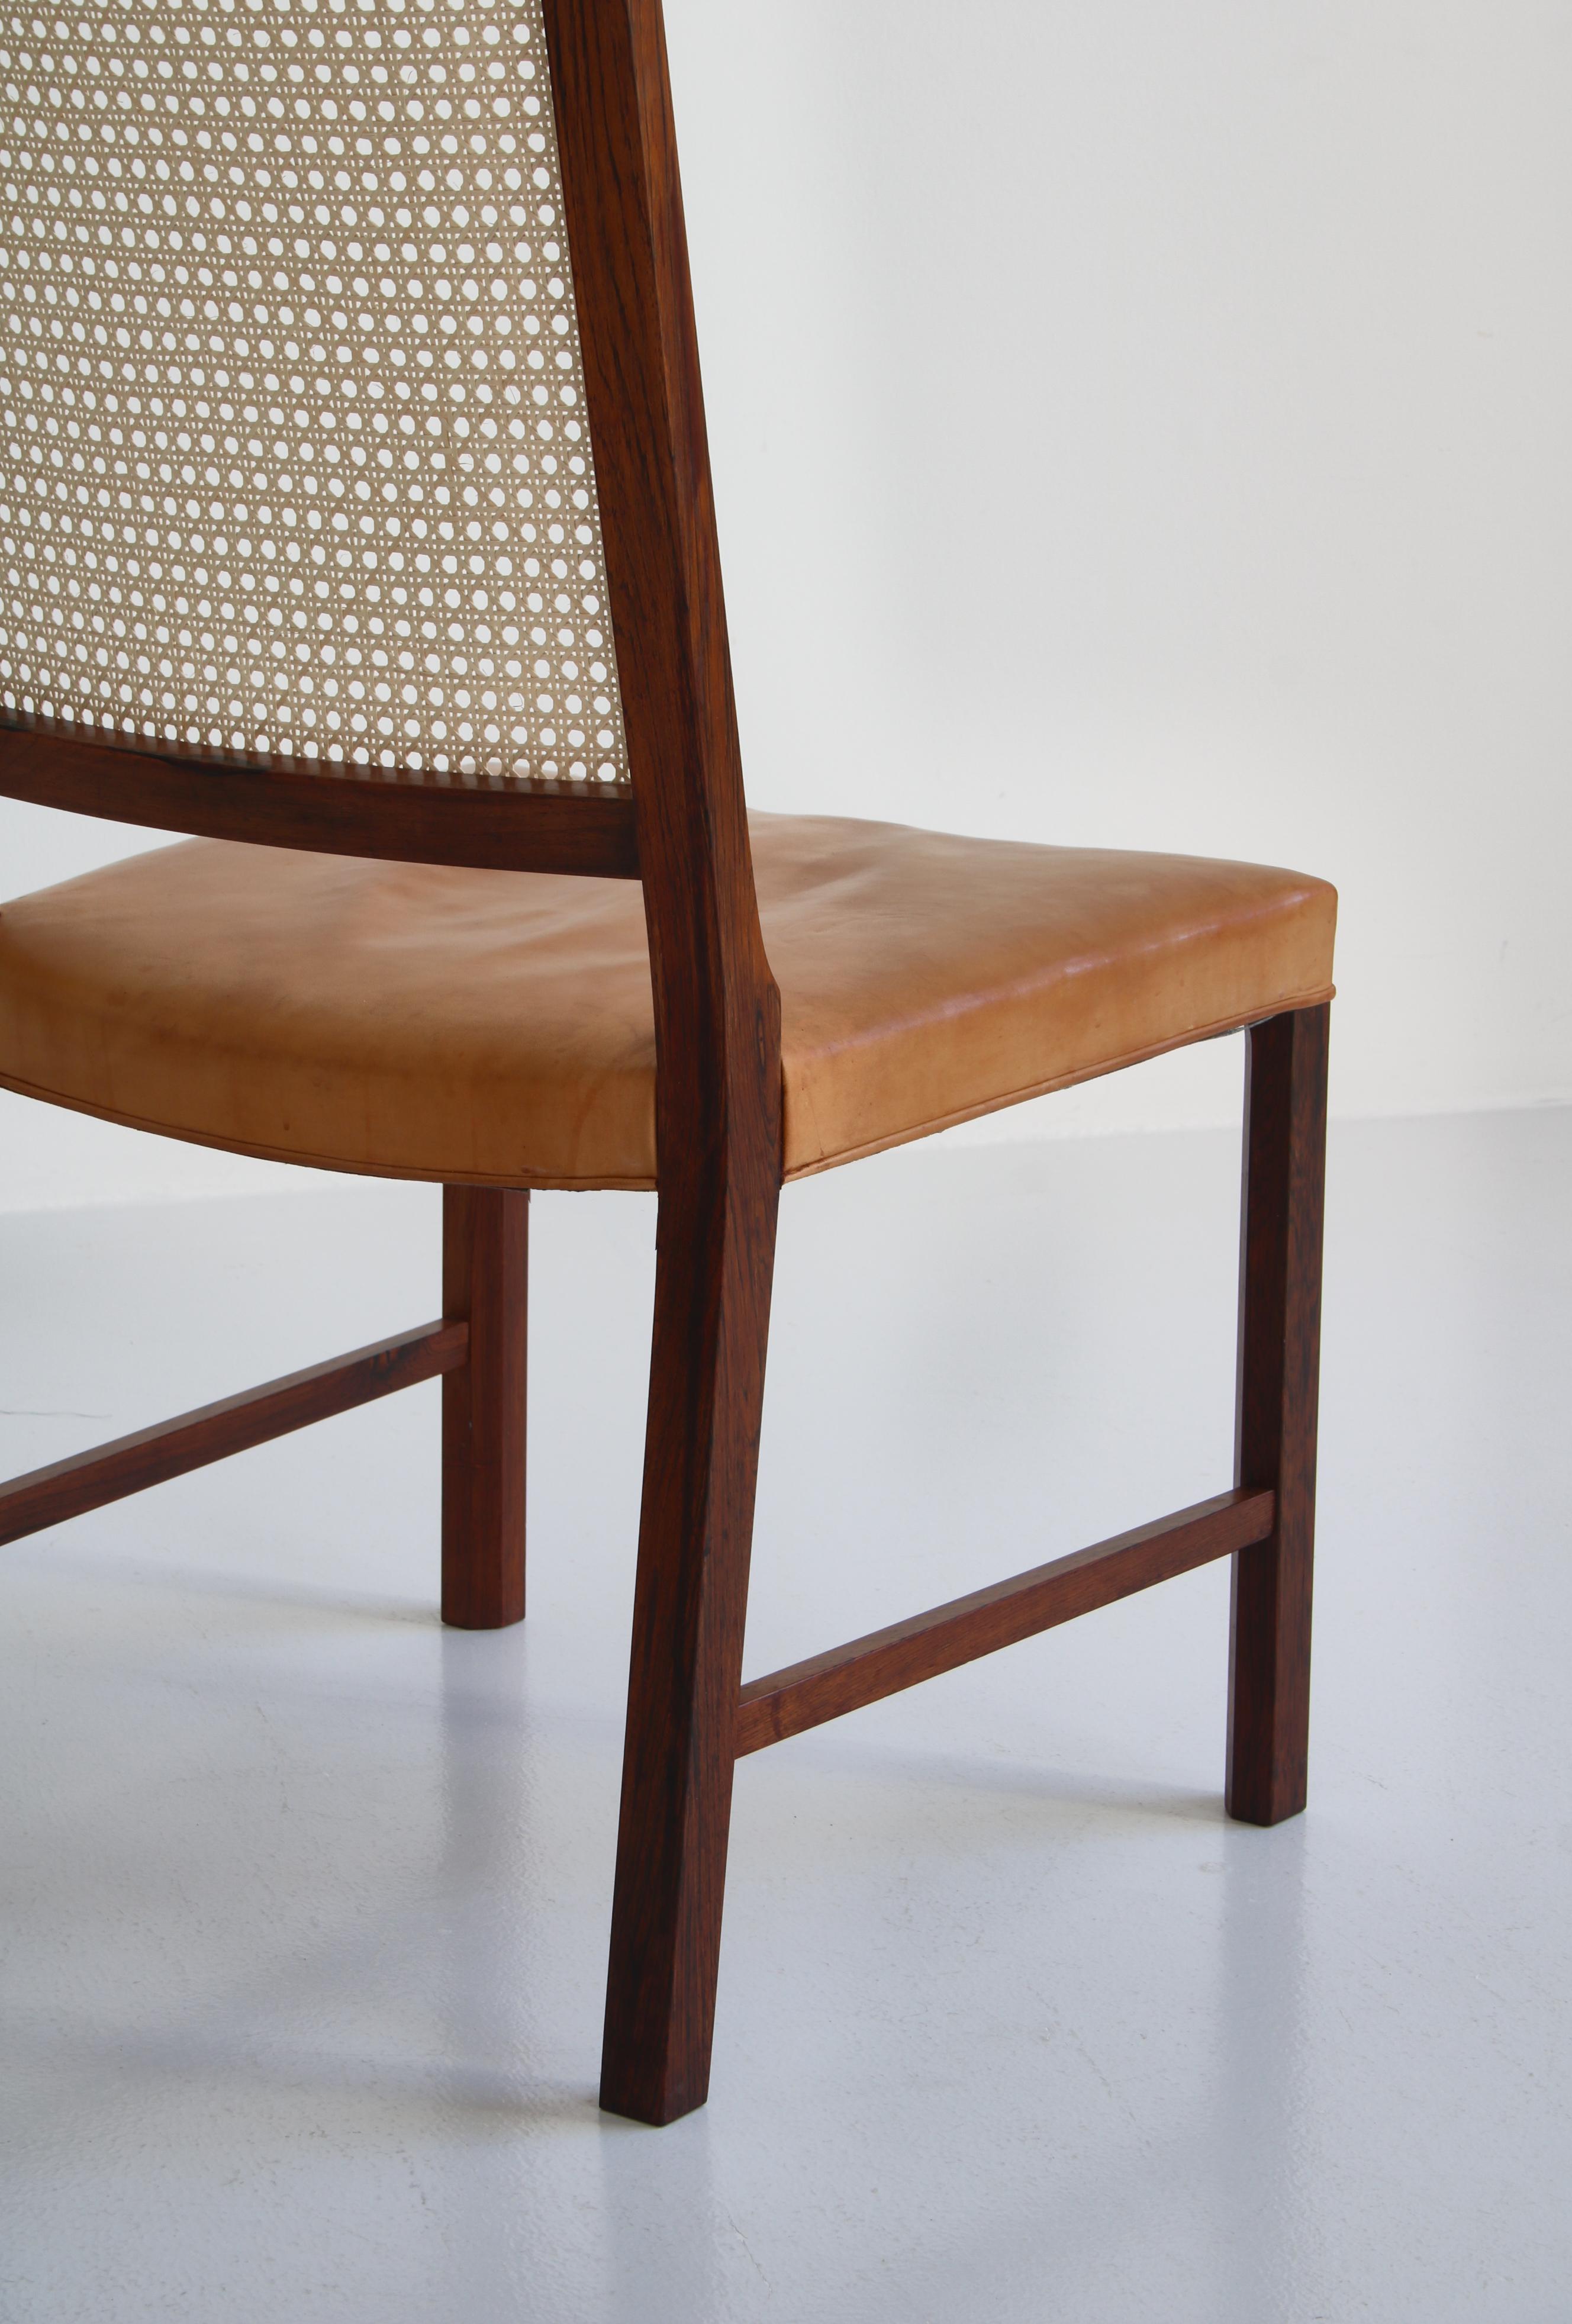 Danish Modern Side Chair in Rosewood and Leather by Bernt Petersen, 1960s 8